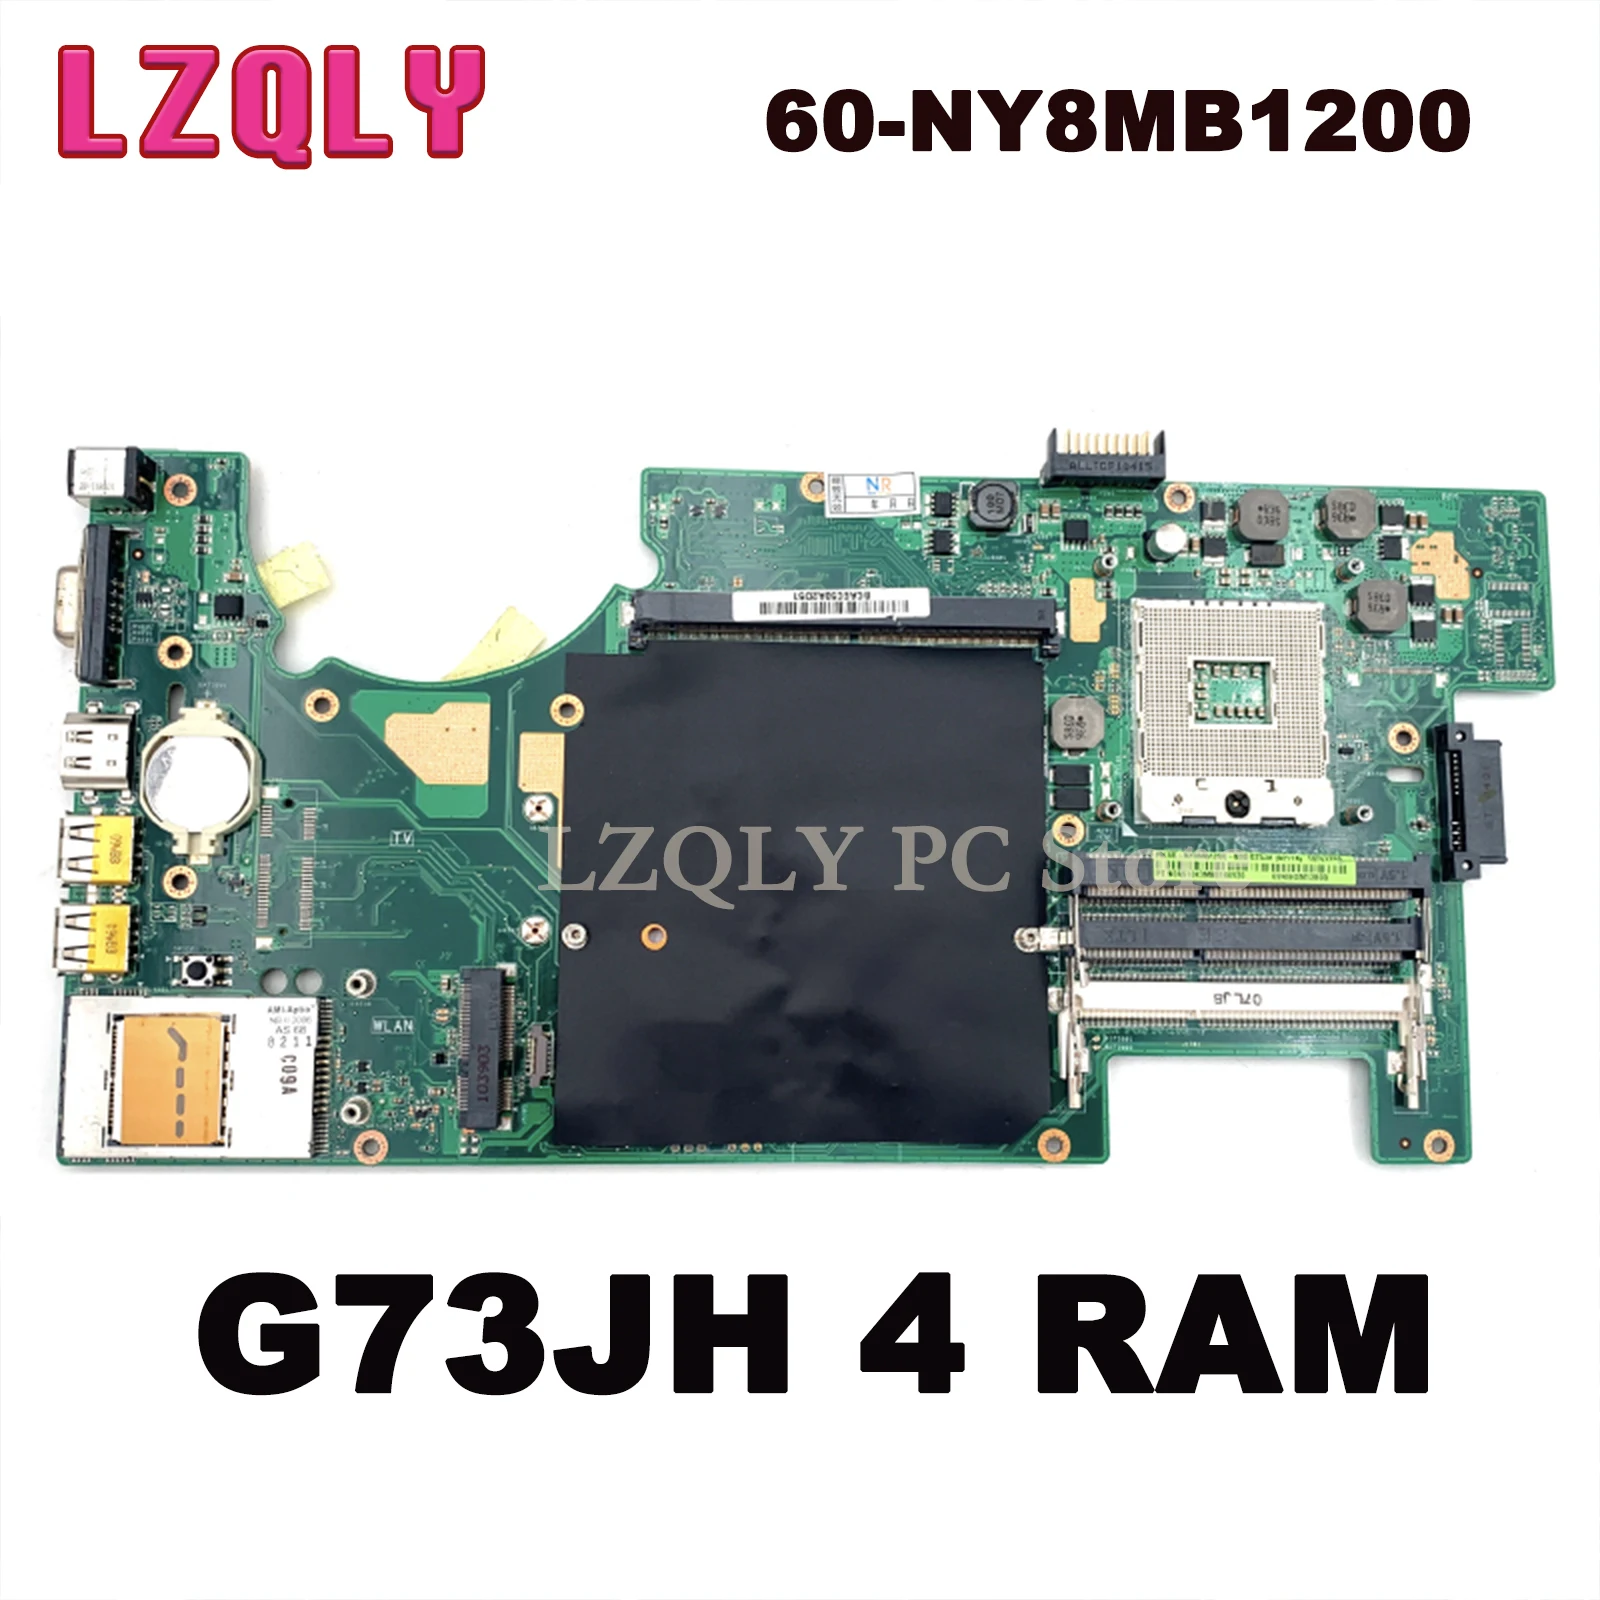 LZQLY For ASUS G73JH G73 60-NY8MB1200 REV:2.0 Series Laptop Motherboard HM55 DDR3 With 4 RAM slots Main Board Full Test